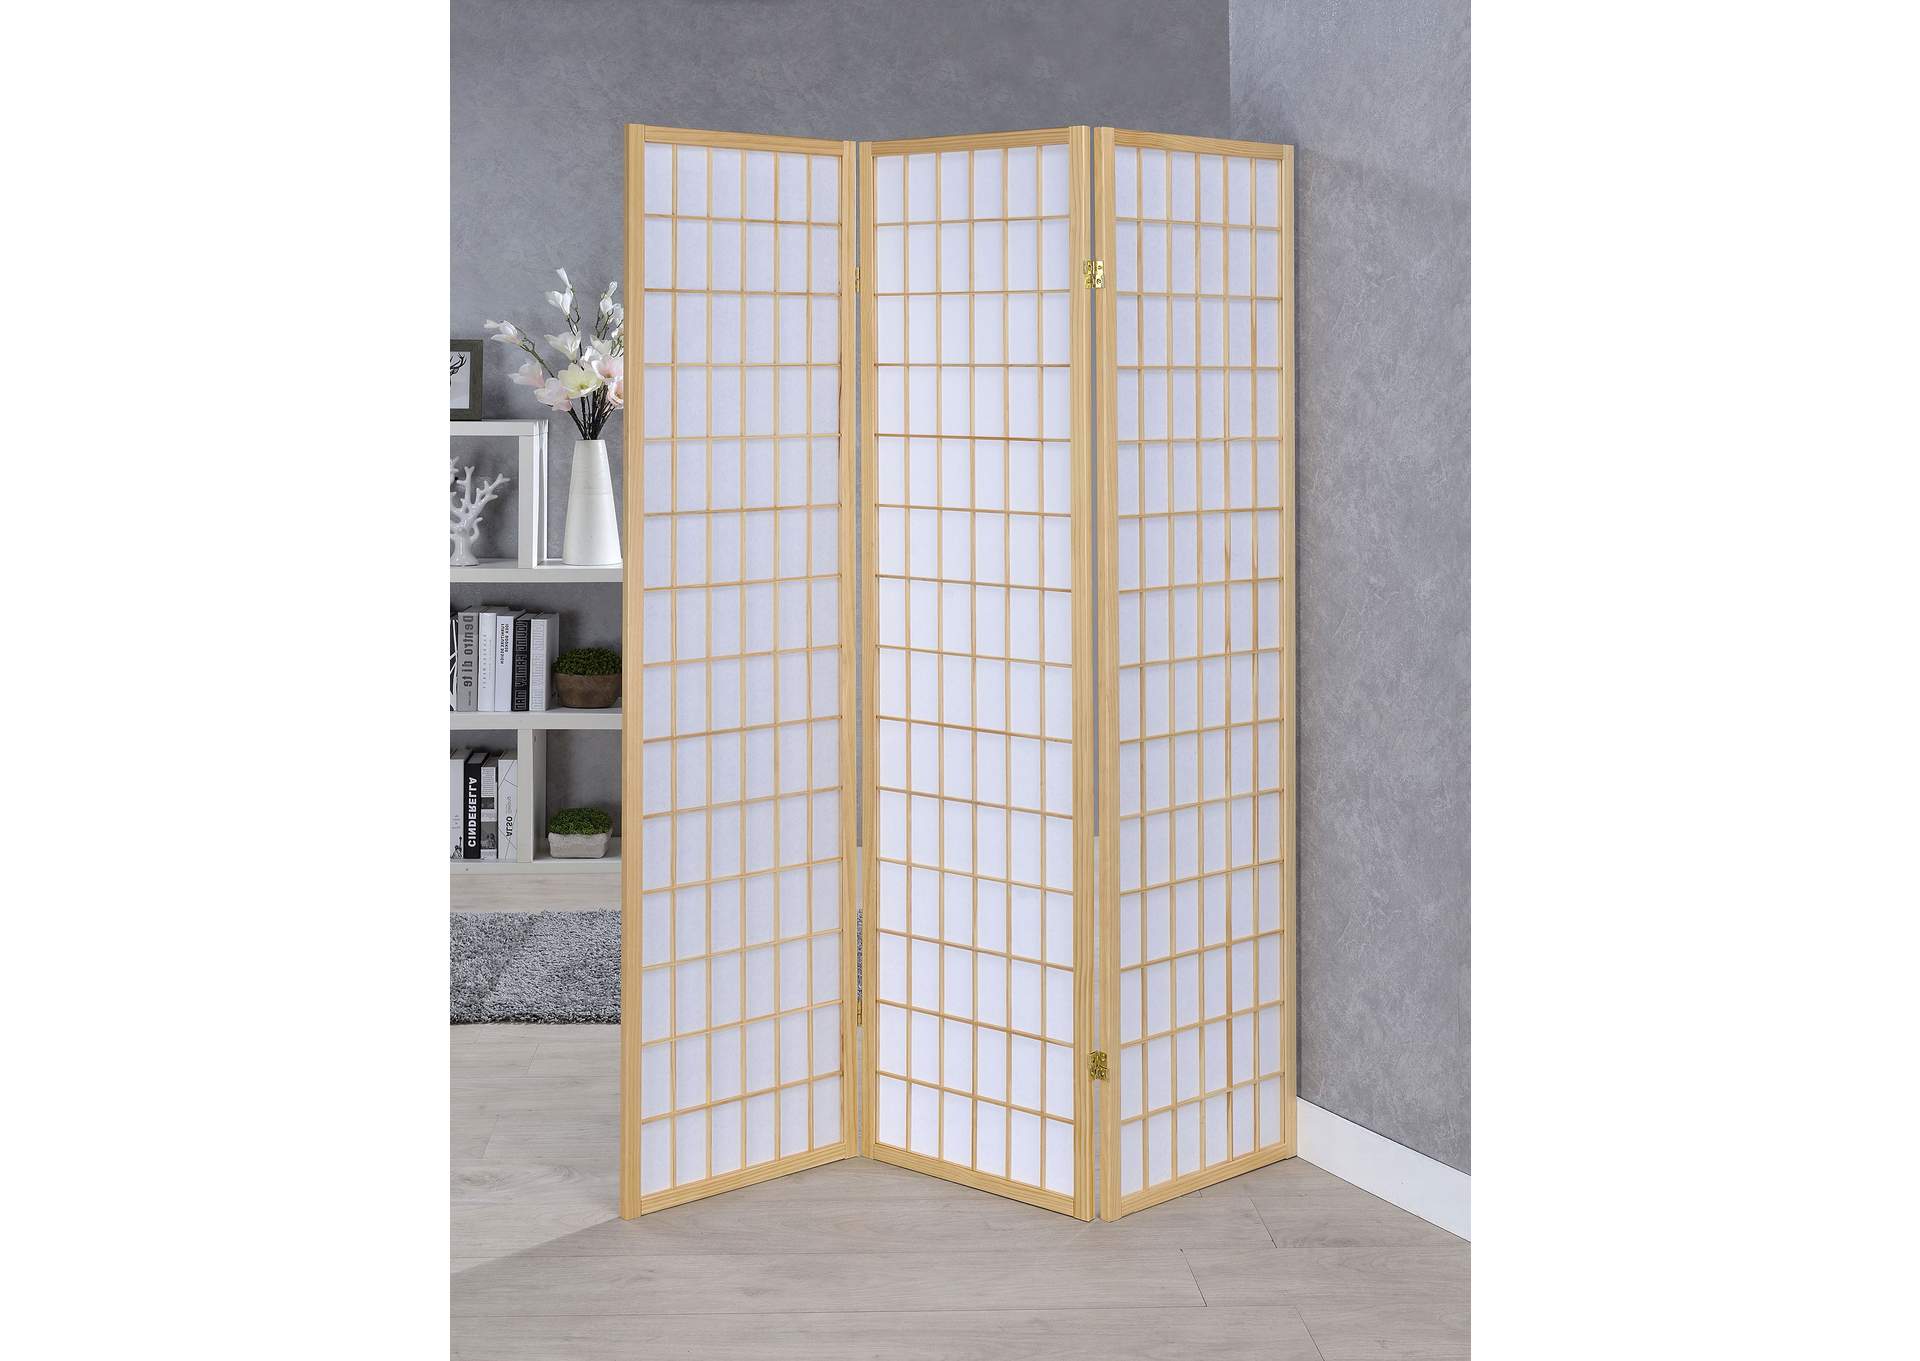 Carrie 3-panel Folding Screen Natural and White,Coaster Furniture